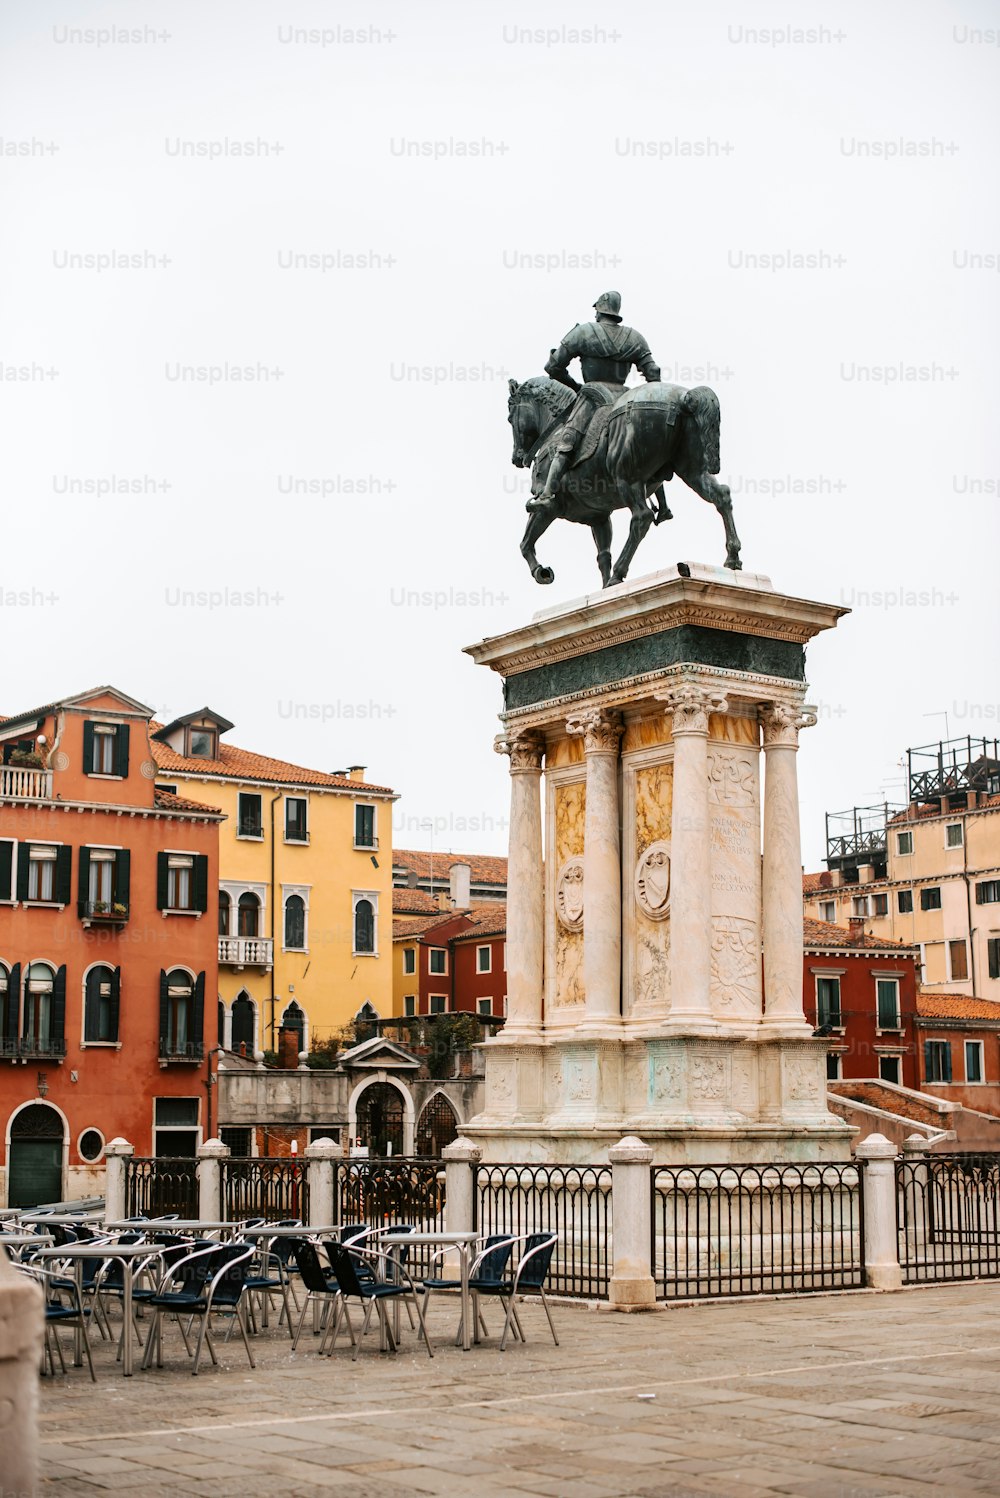 a statue of a man riding a horse in a plaza